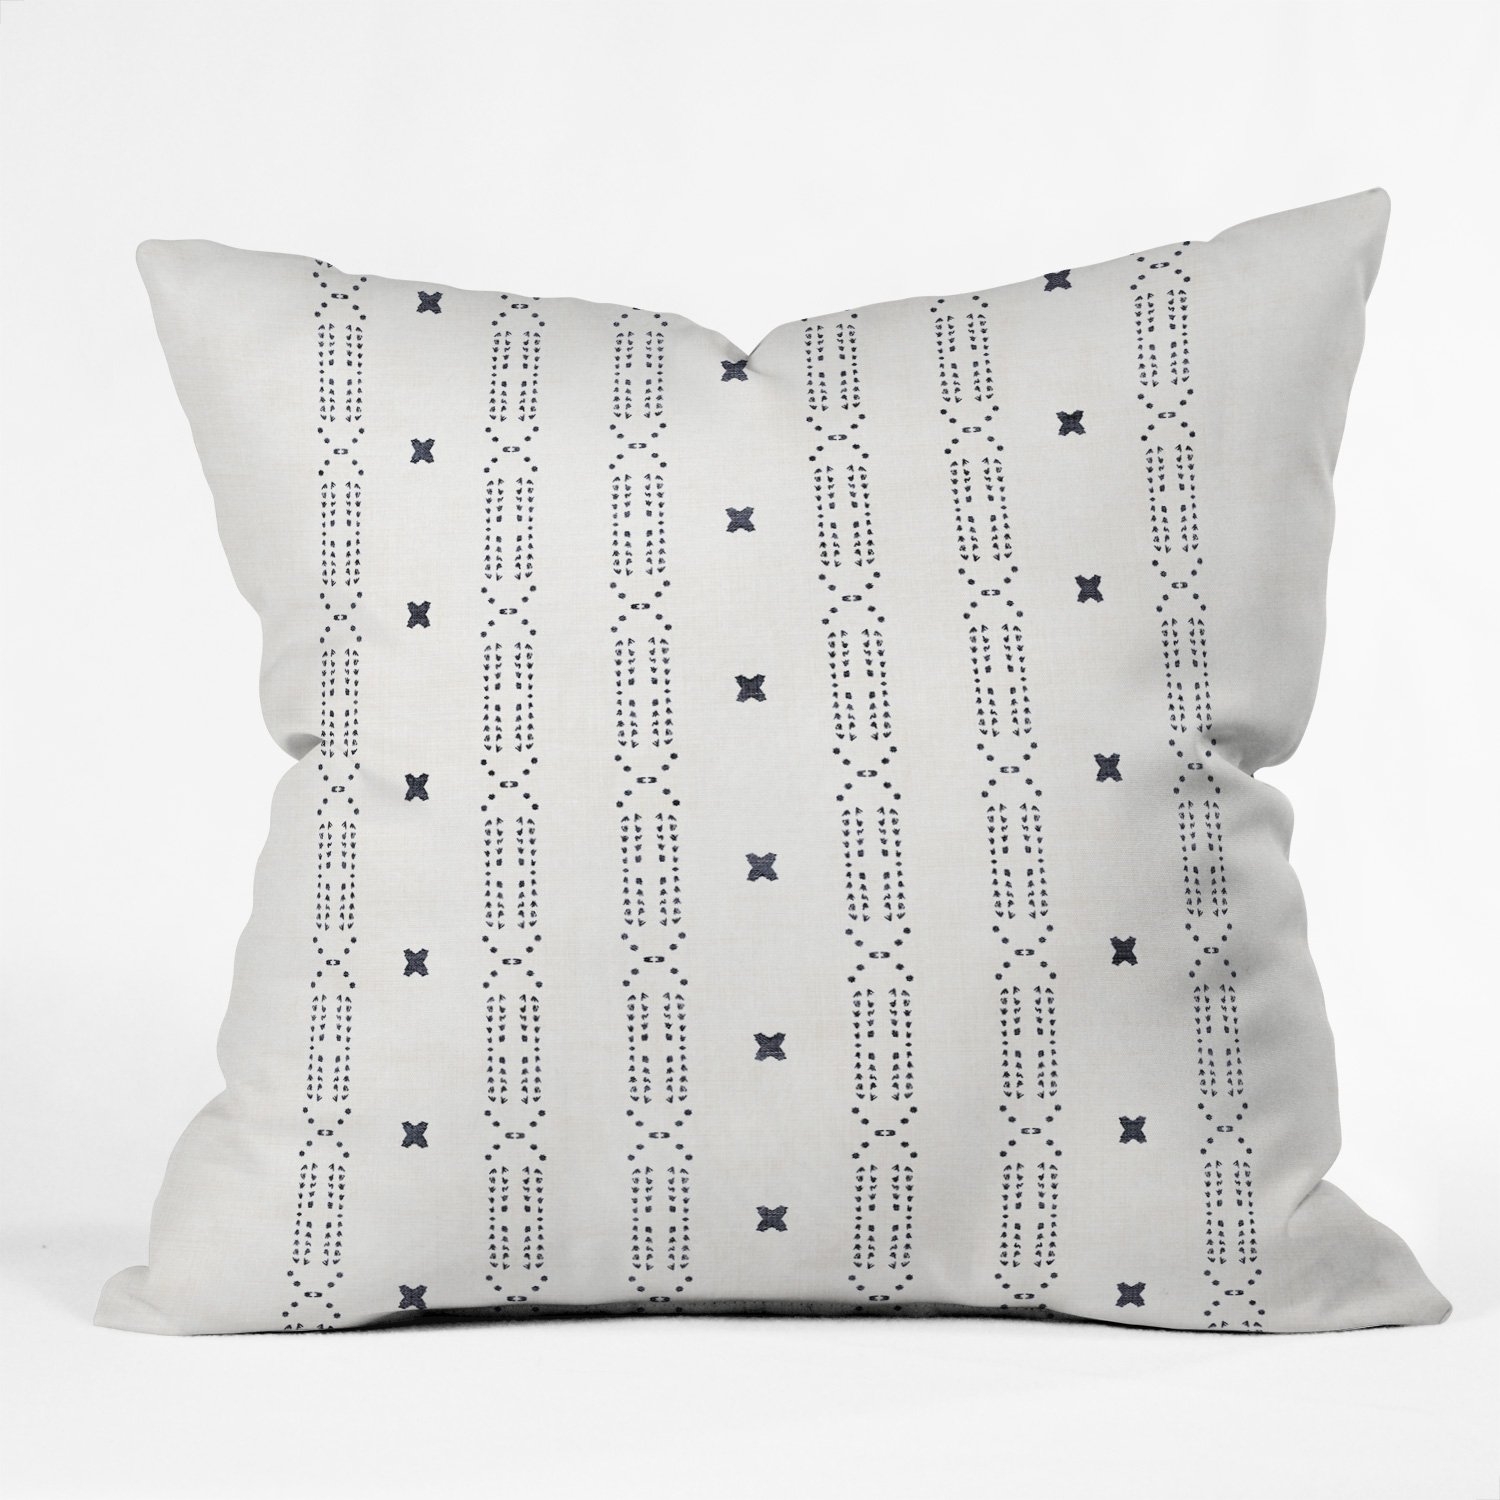 MALA Throw Pillow - 16" x 16" - with poly fill - Image 0